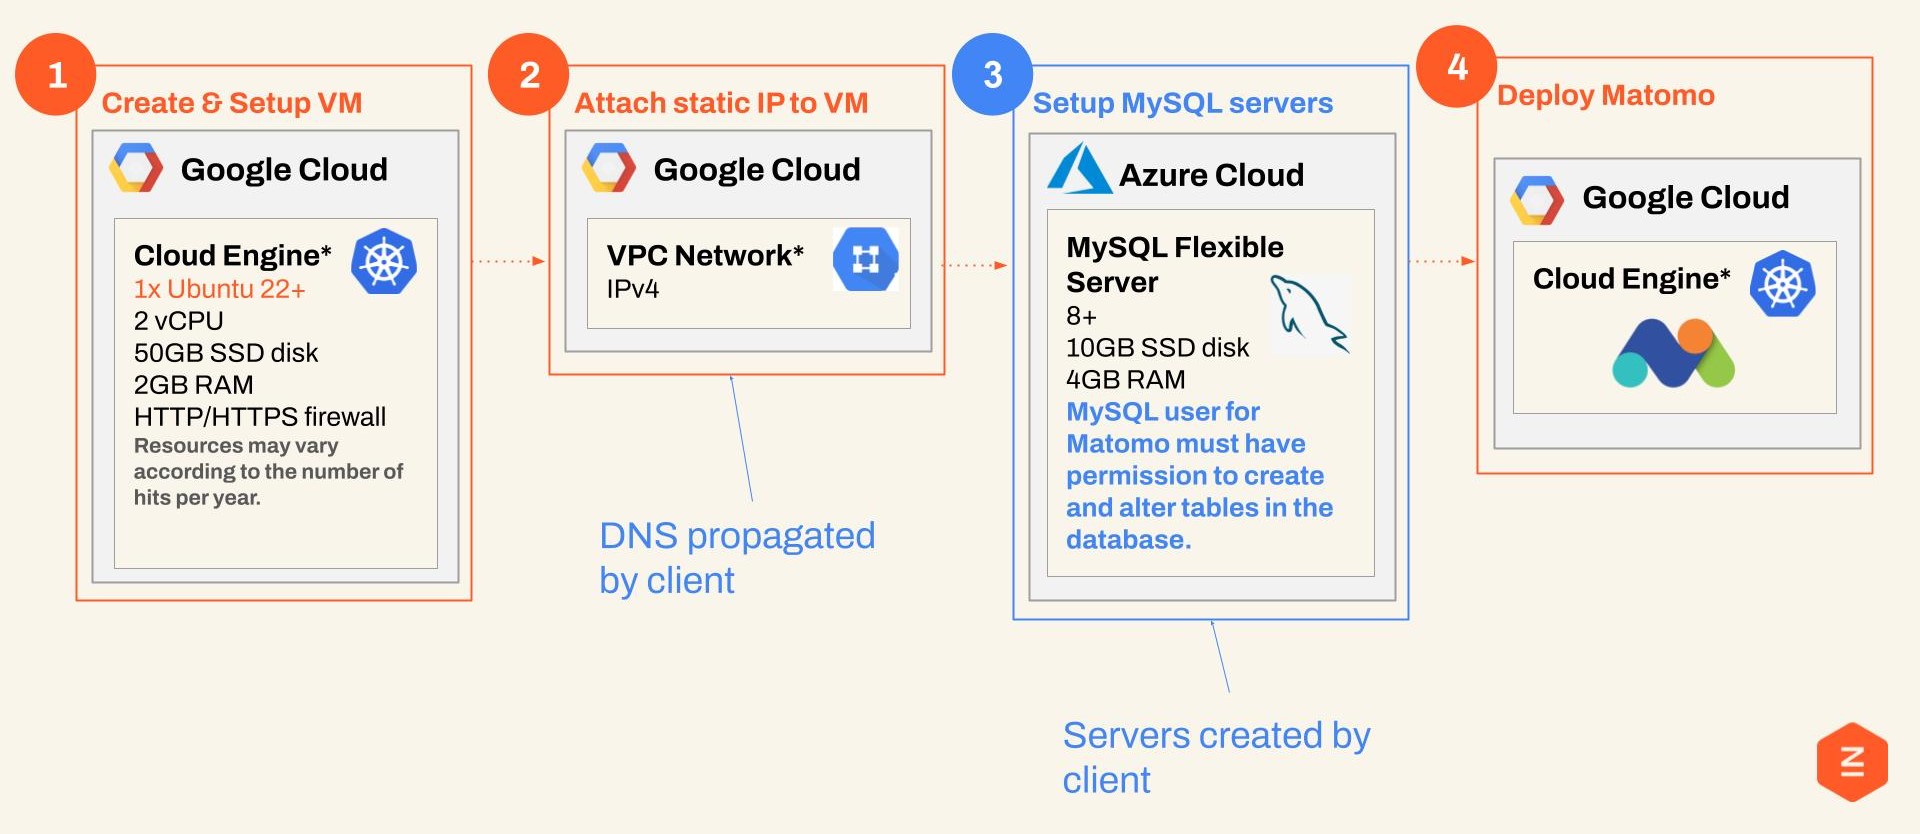 Technical Steps for Matomo On-Premise Deployment, Integrating Two Cloud Environments - GCP & Azure
